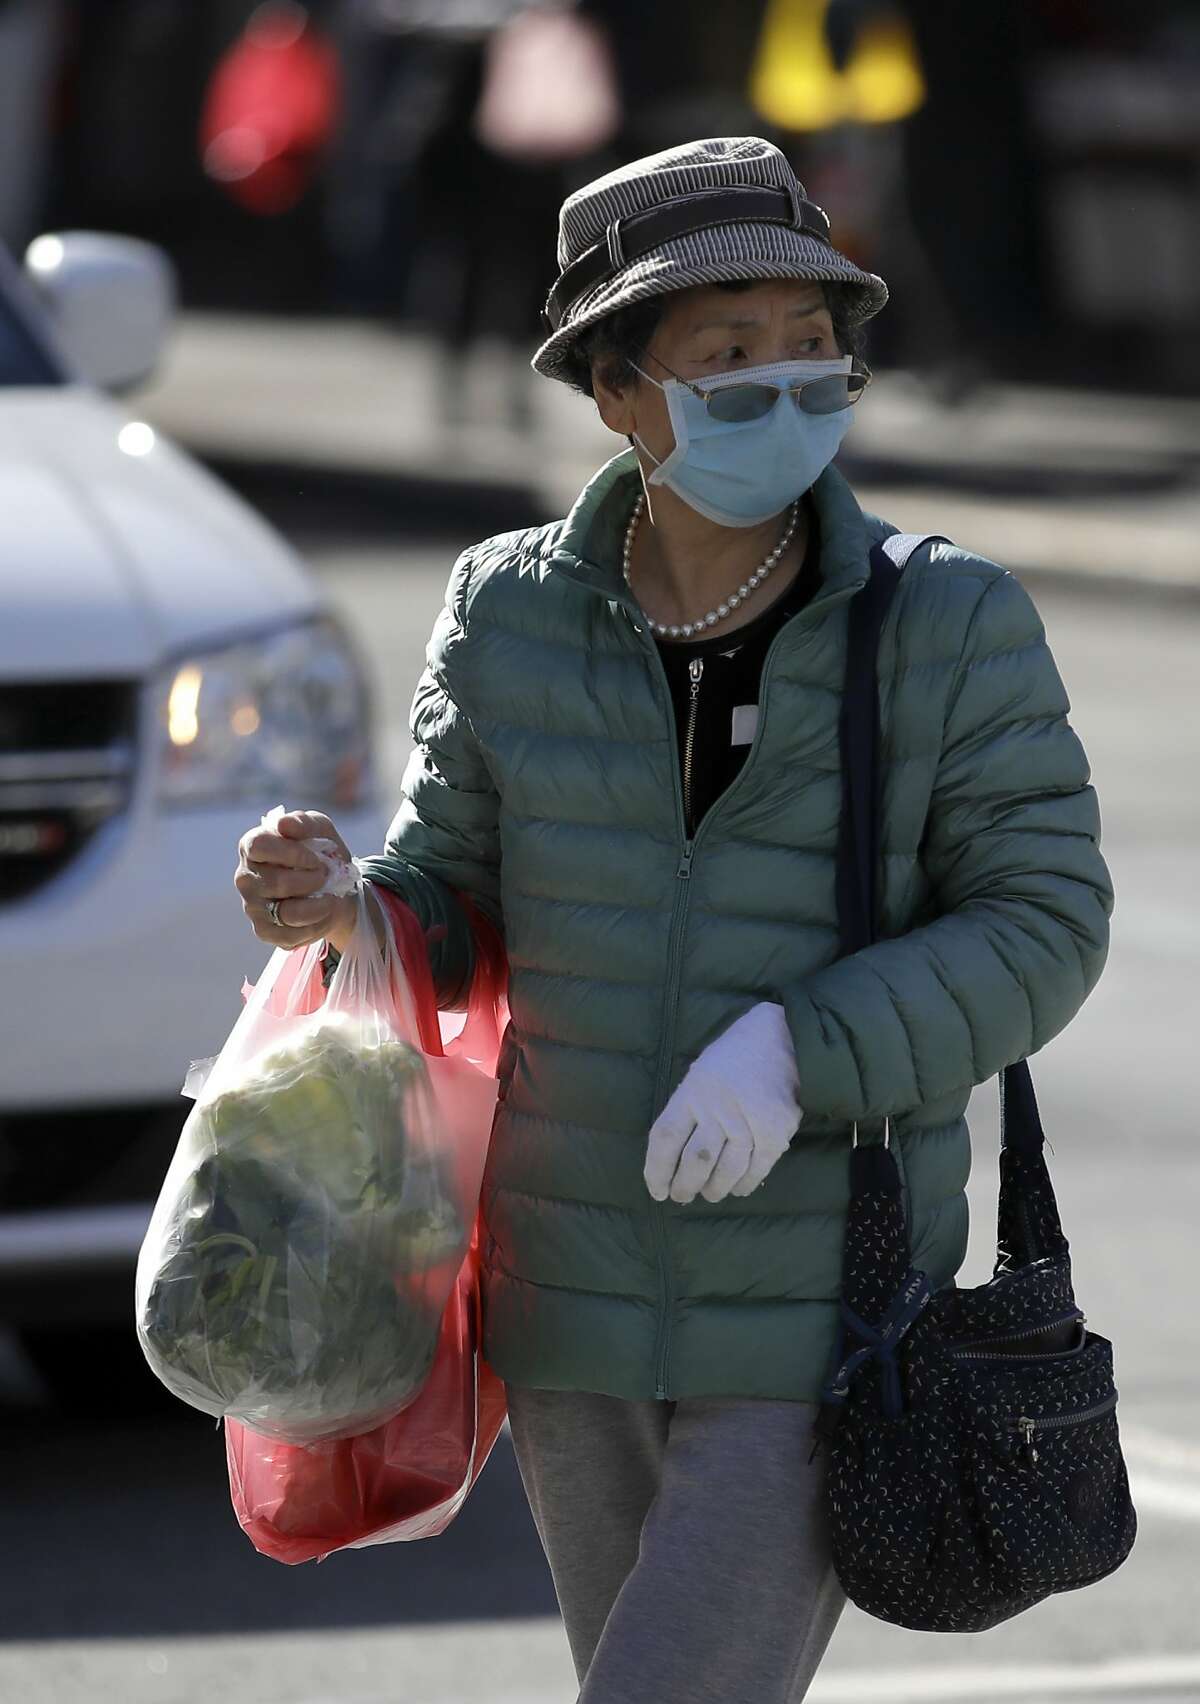 A masked shopper walks across a street Friday, Jan. 31, 2020, in the Chinatown district of San Francisco. As China grapples with the growing coronavirus outbreak, Chinese people in California are encountering a cultural disconnect as they brace for a possible spread of the virus in their adopted homeland. (AP Photo/Ben Margot)